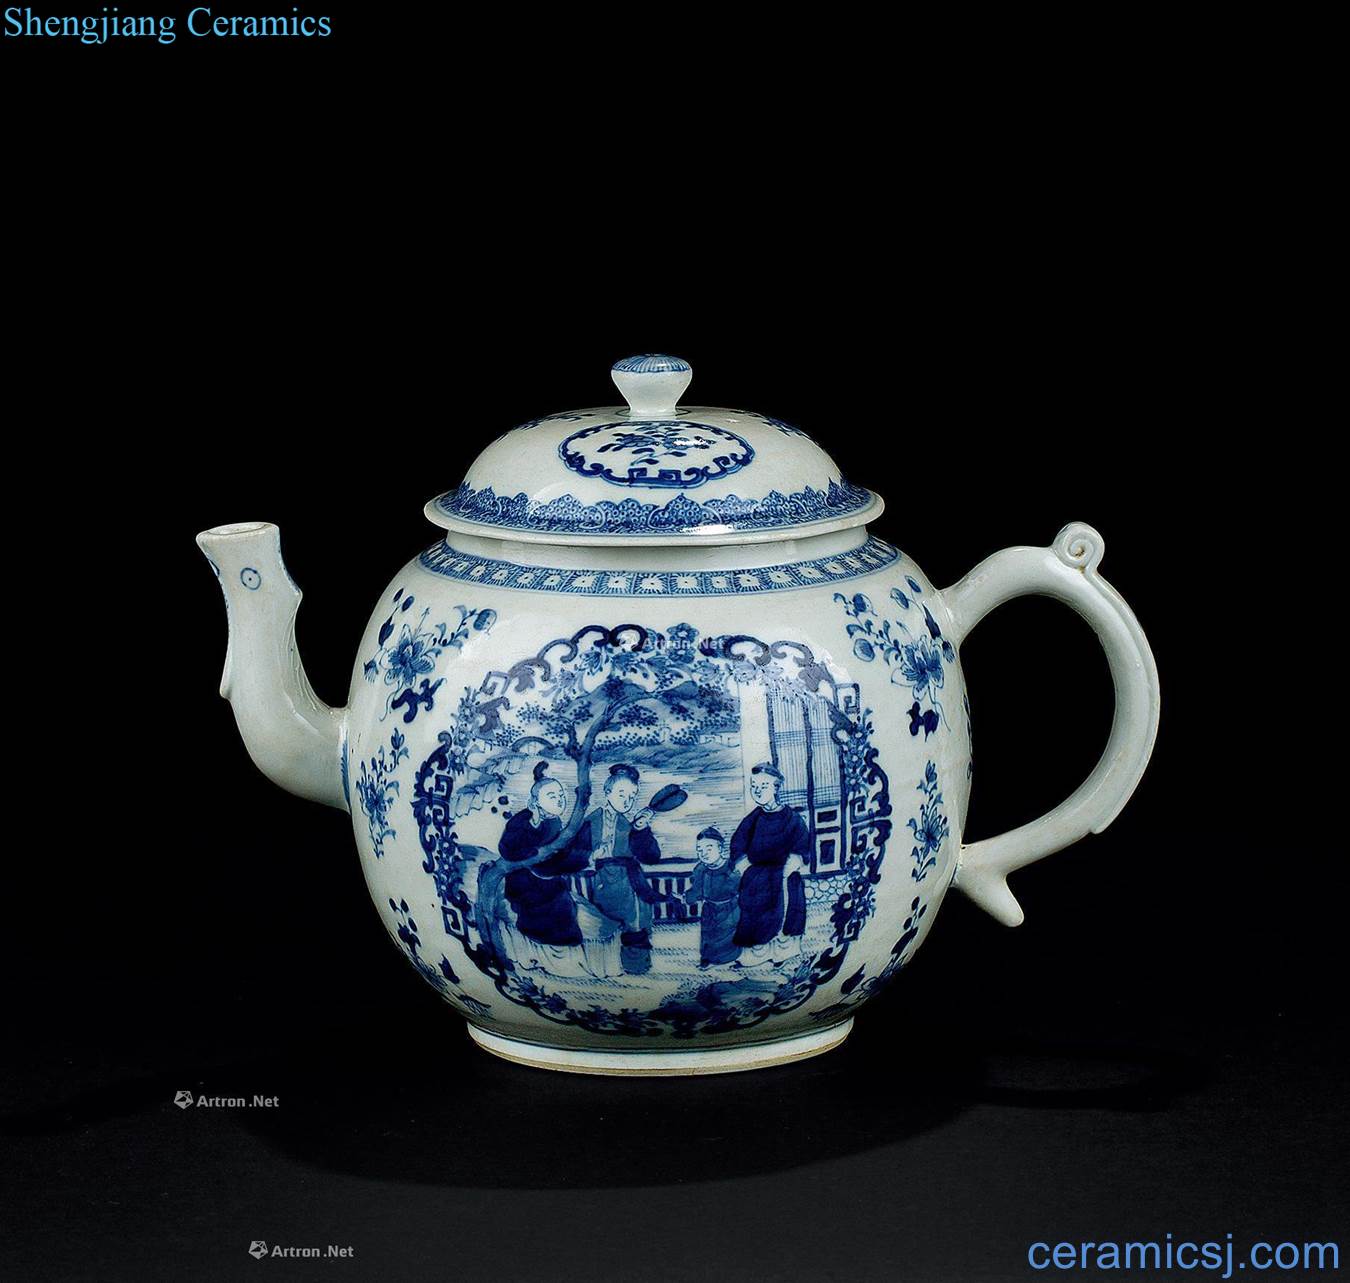 In the qing dynasty (1644-1911) character wen wen pot flowers